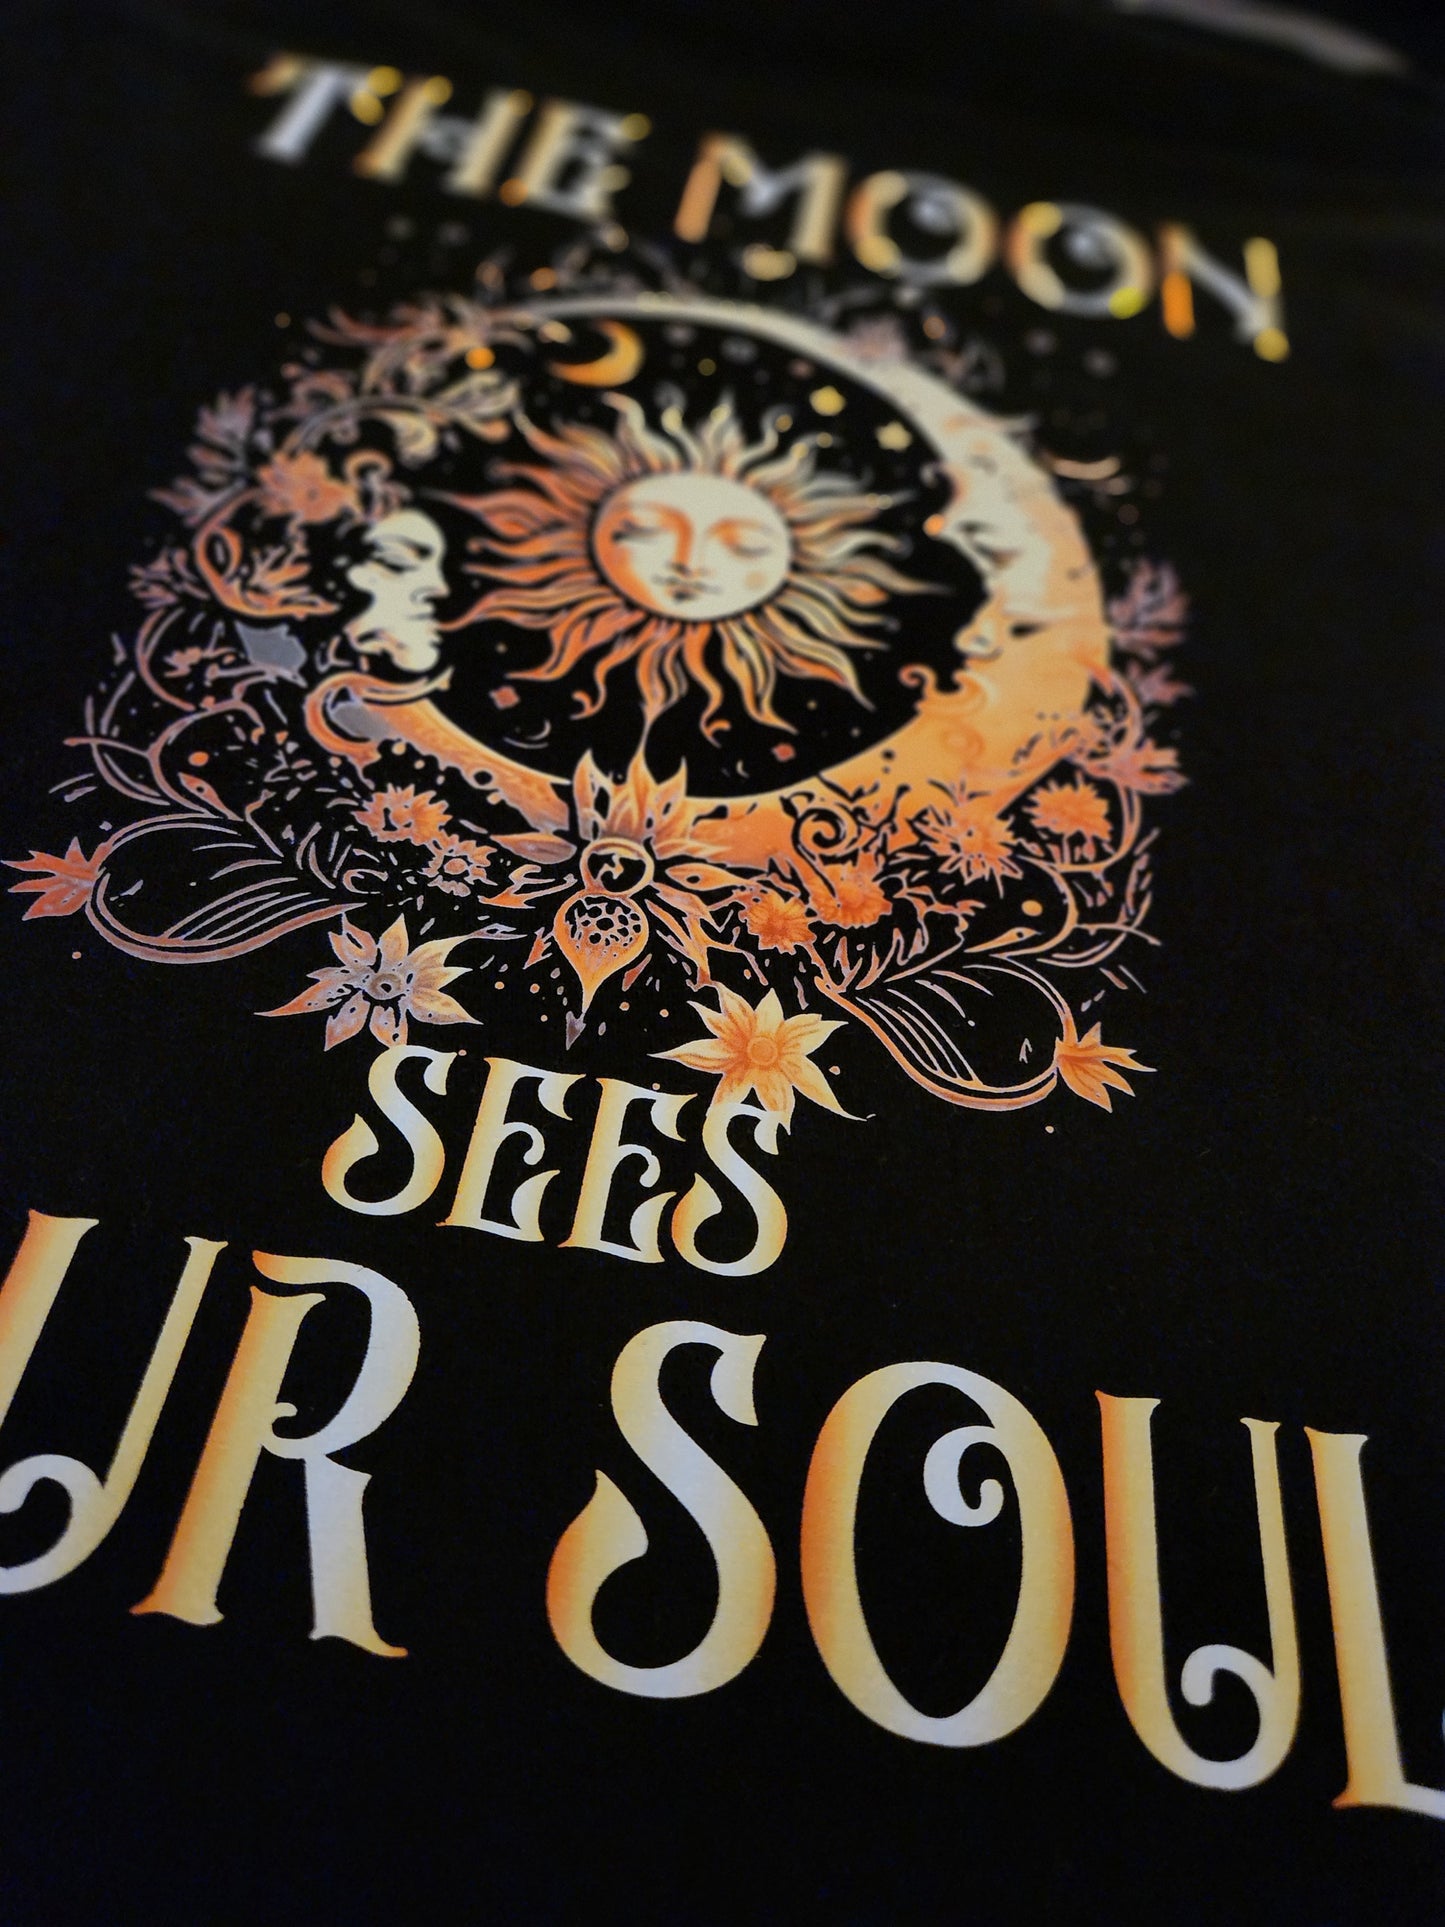 The Moon sees your SOul ADULT TEES